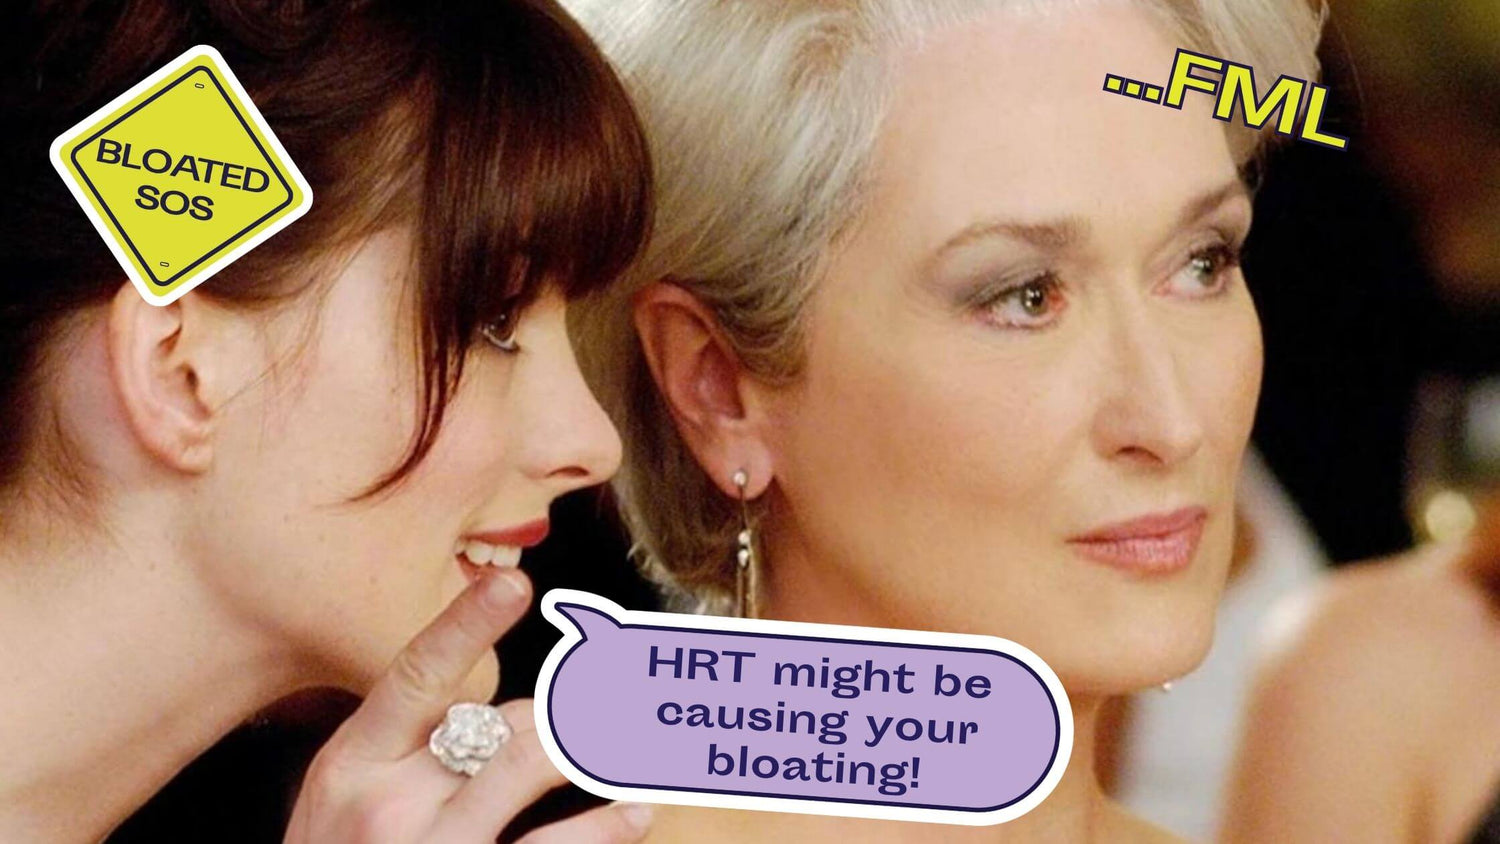 How Do I Stop Bloating from HRT Naturally?